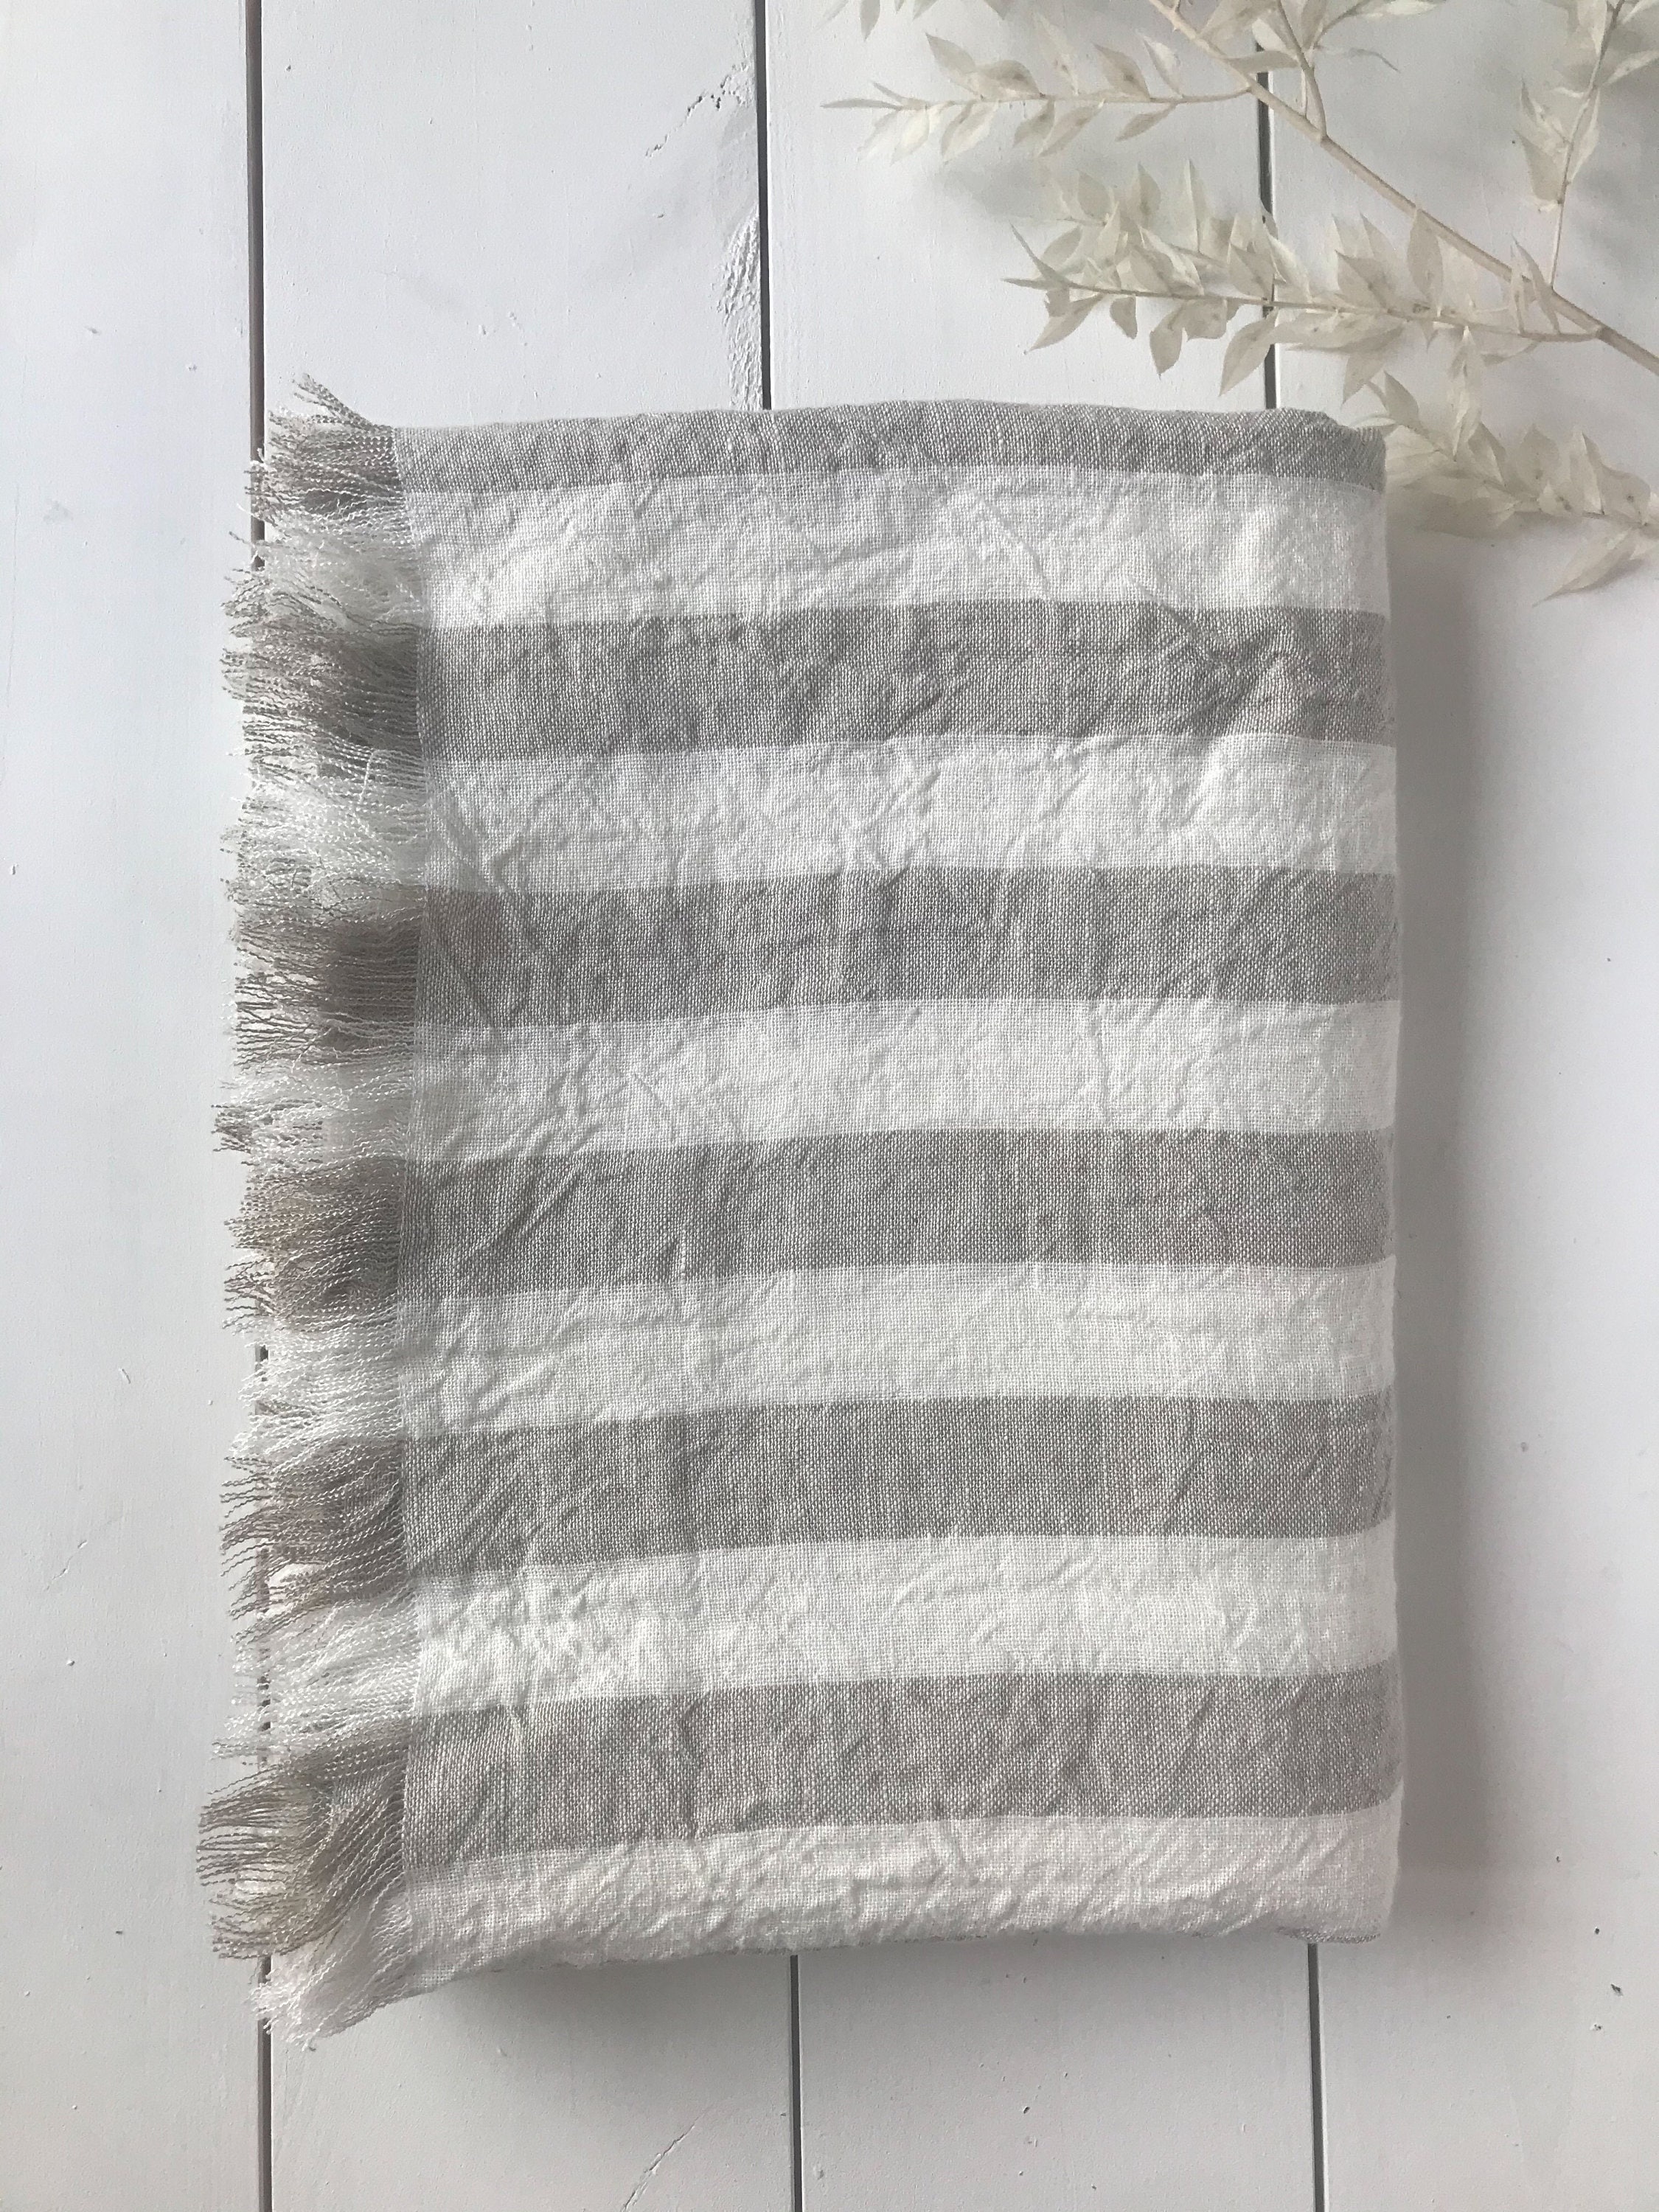 Stonewashed linen - pure 100% linen flax luxury beach bath towel light blue  with white stripes pre-washed laundered European linen lint free fast dry  linen throw beach blanket picnic blanket bath sheet